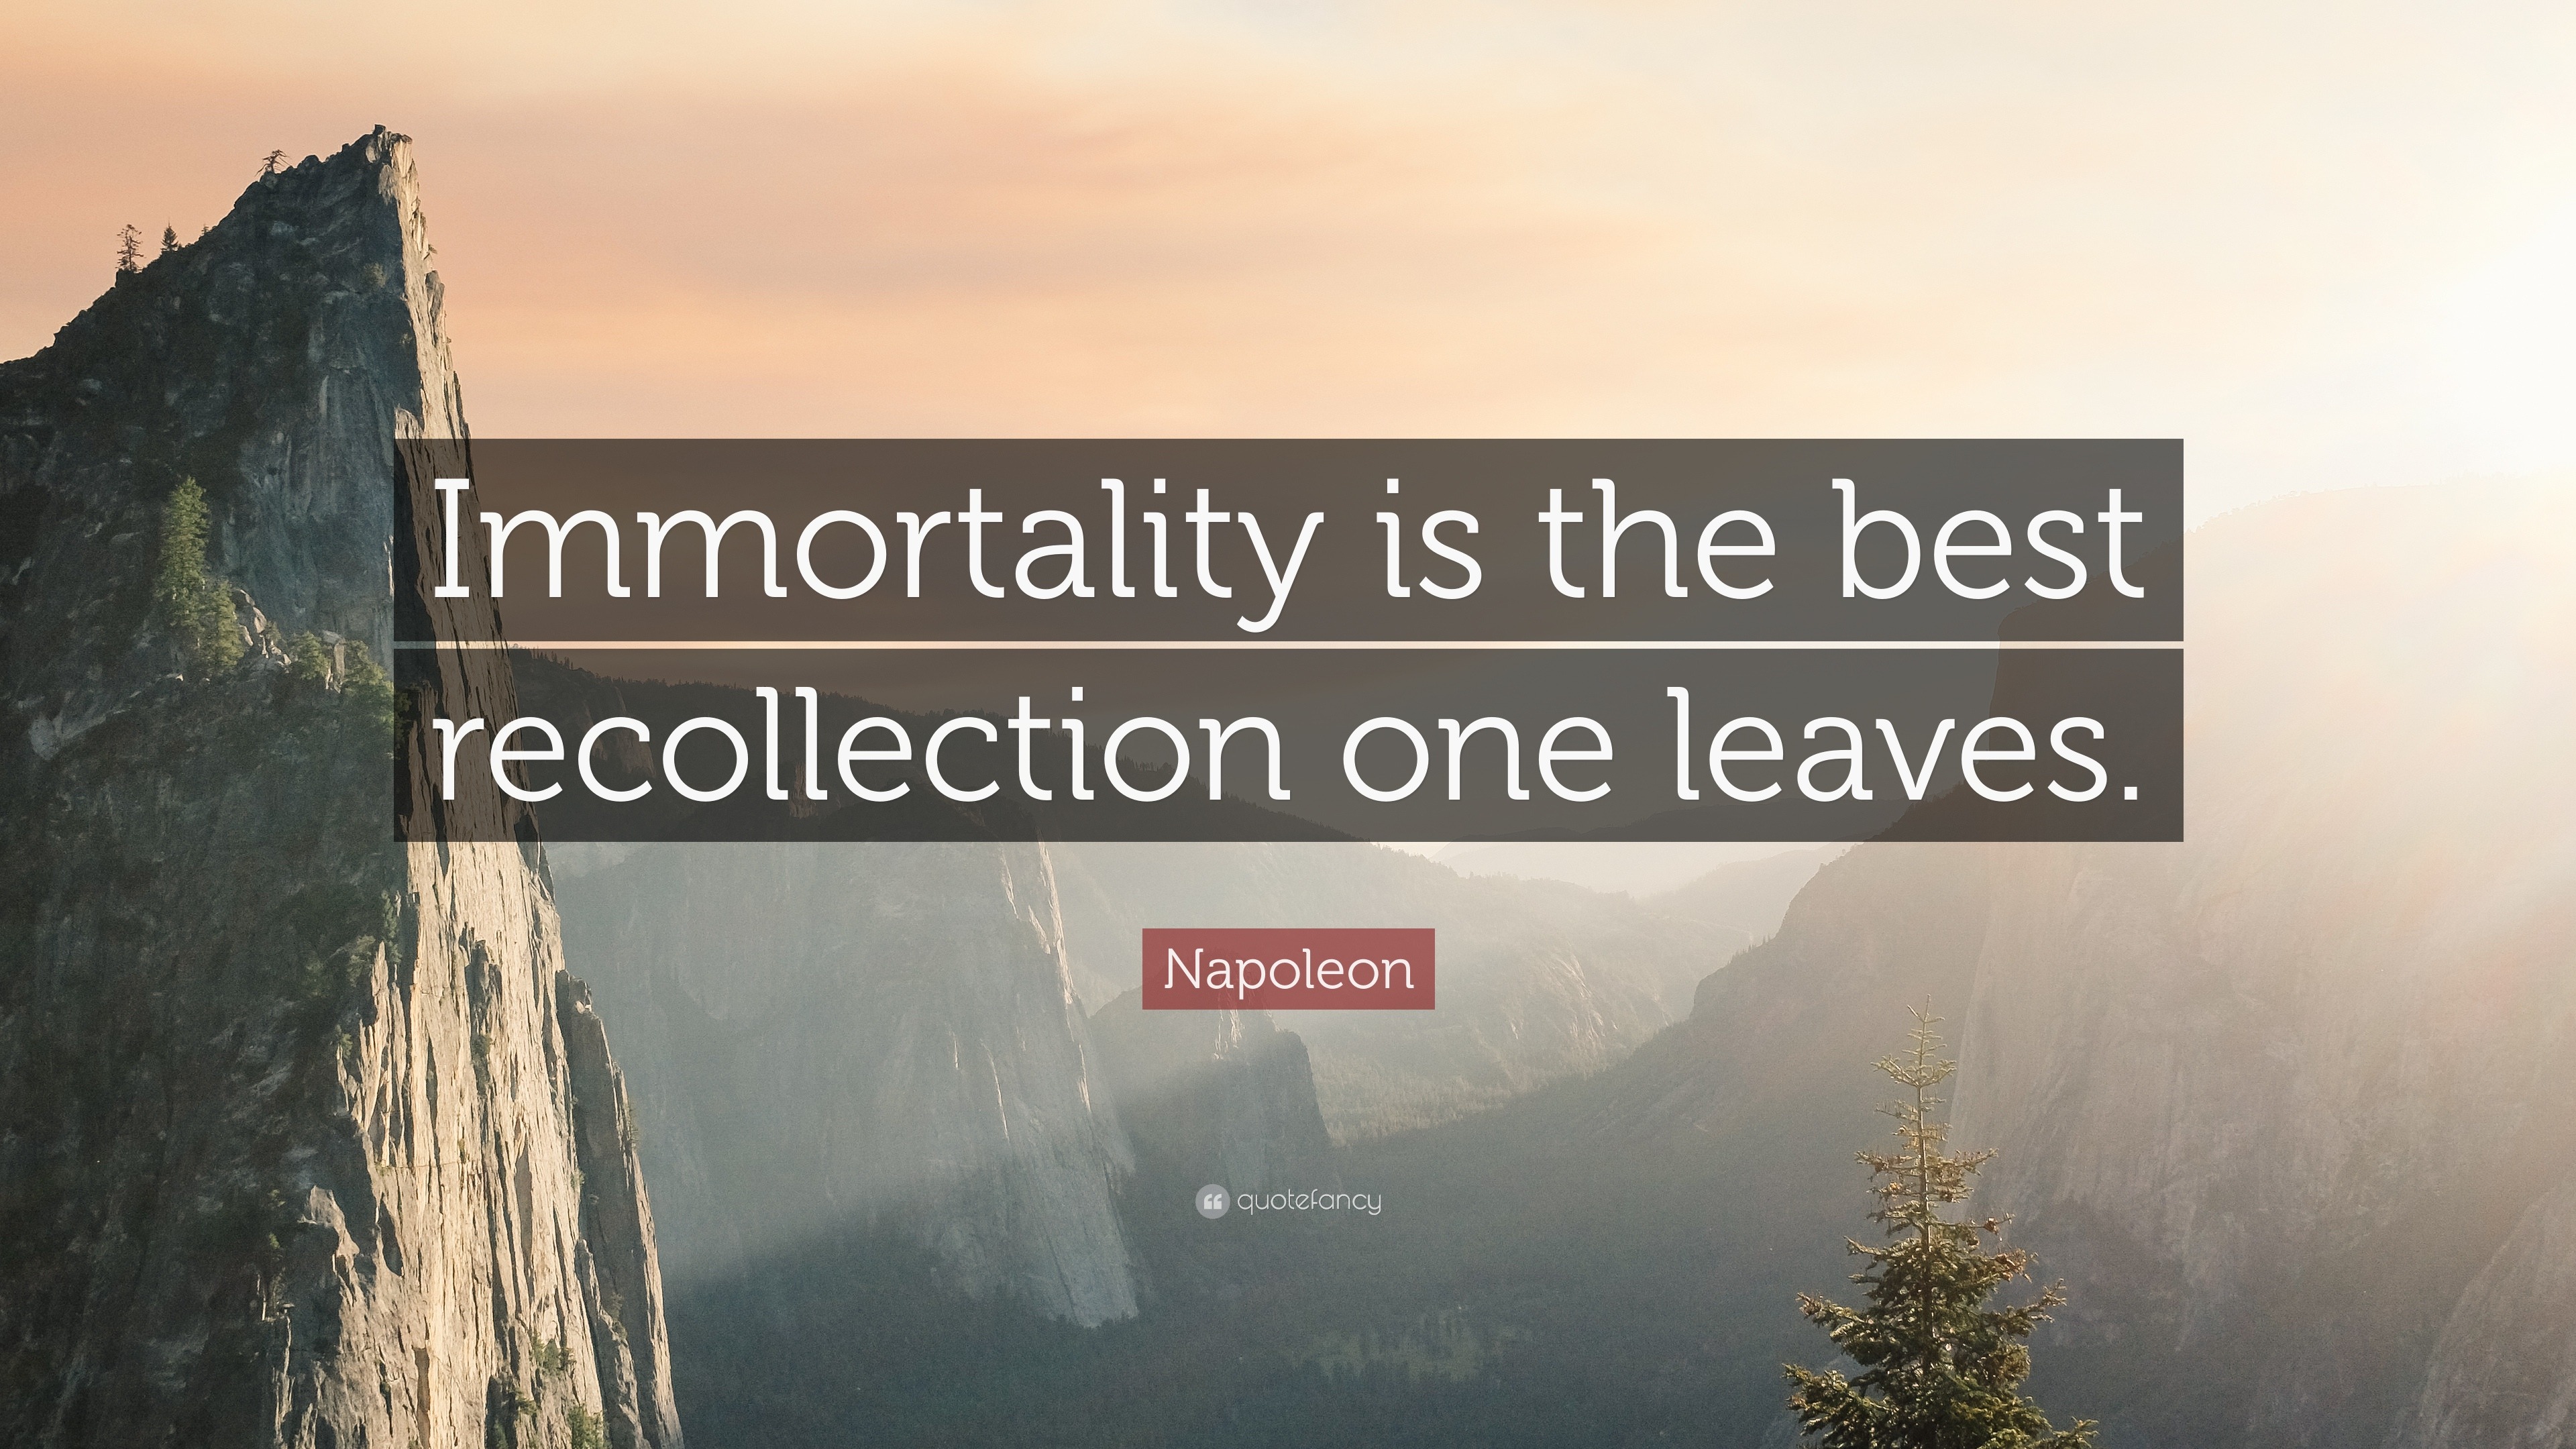 Napoleon Quote: "Immortality is the best recollection one leaves." (7 wallpapers) - Quotefancy